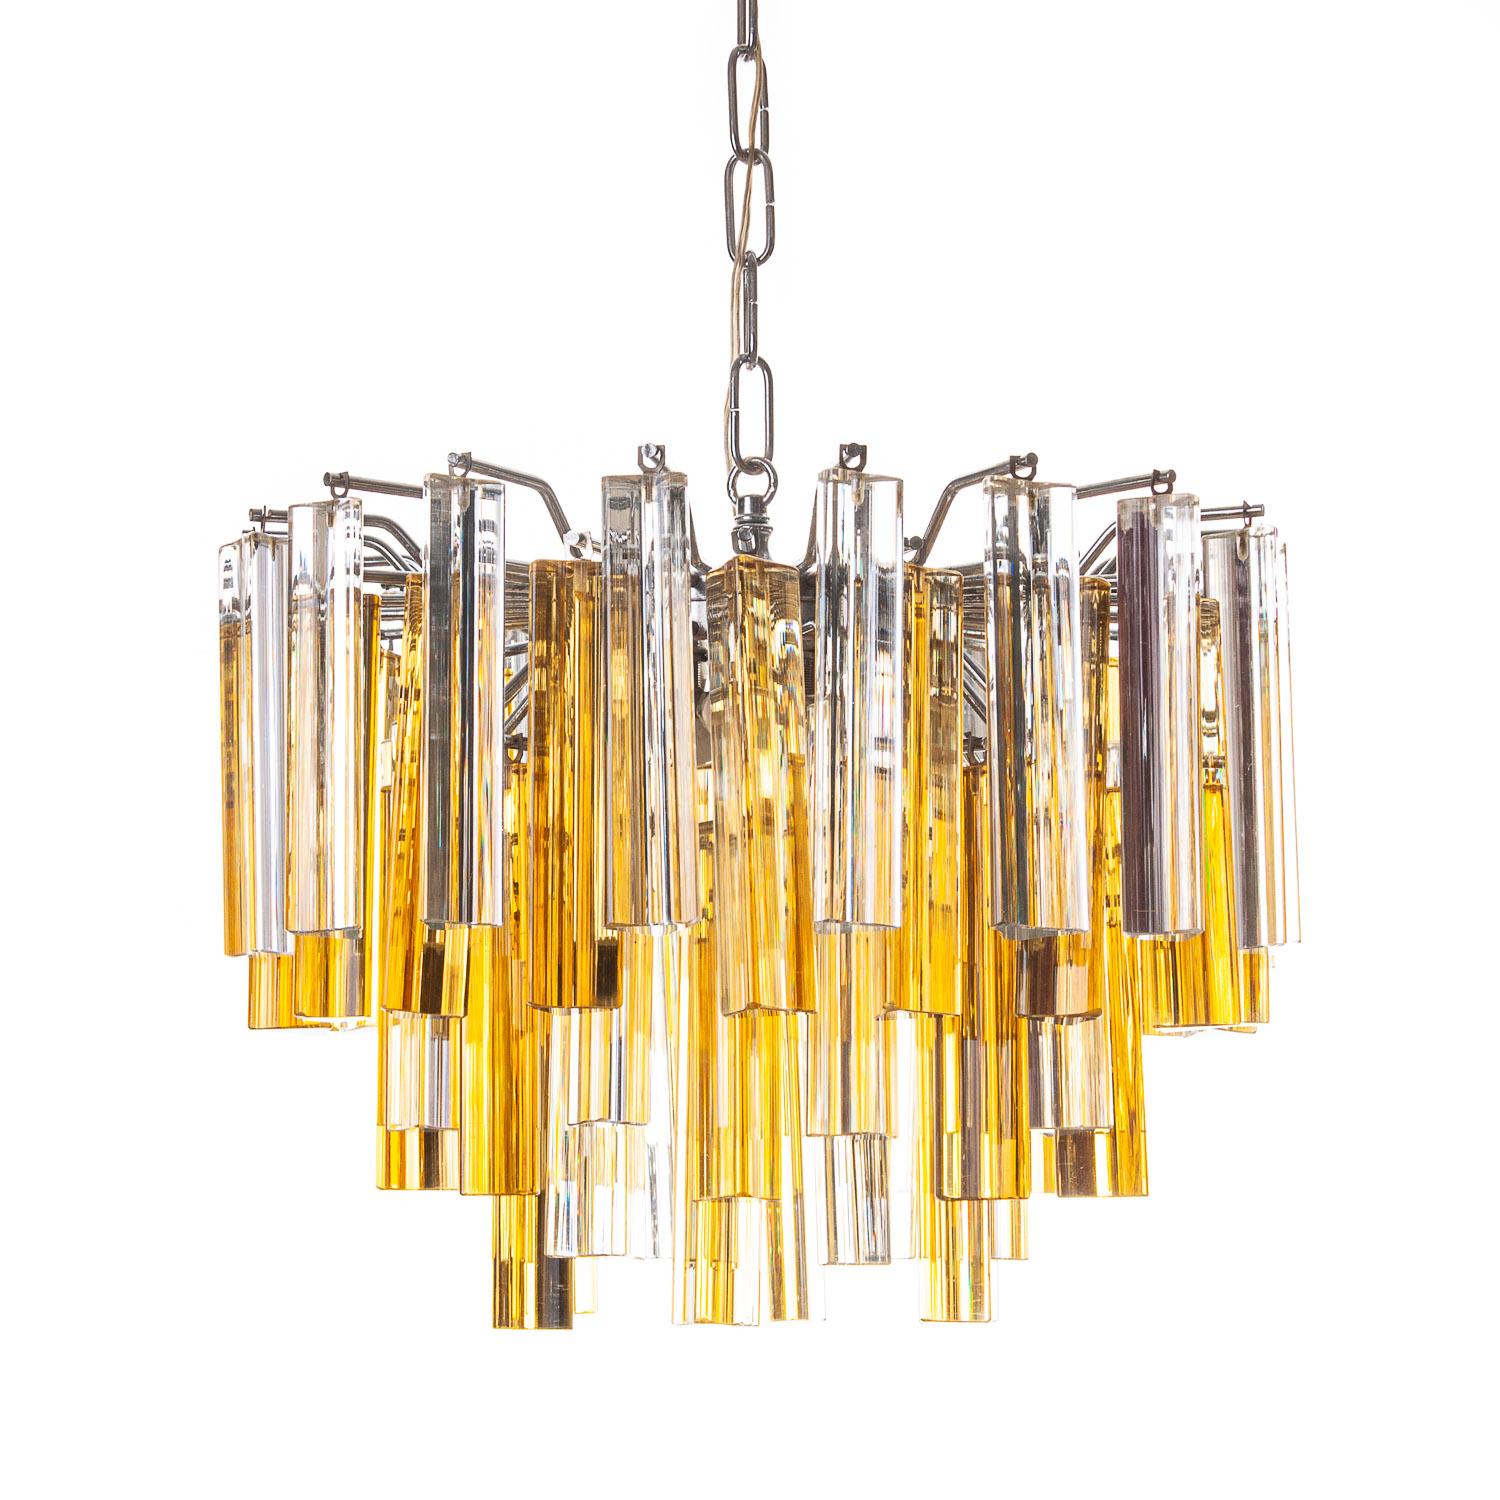 1960s Glass and Chrome Chandelier Attributed to Venini For Sale 6